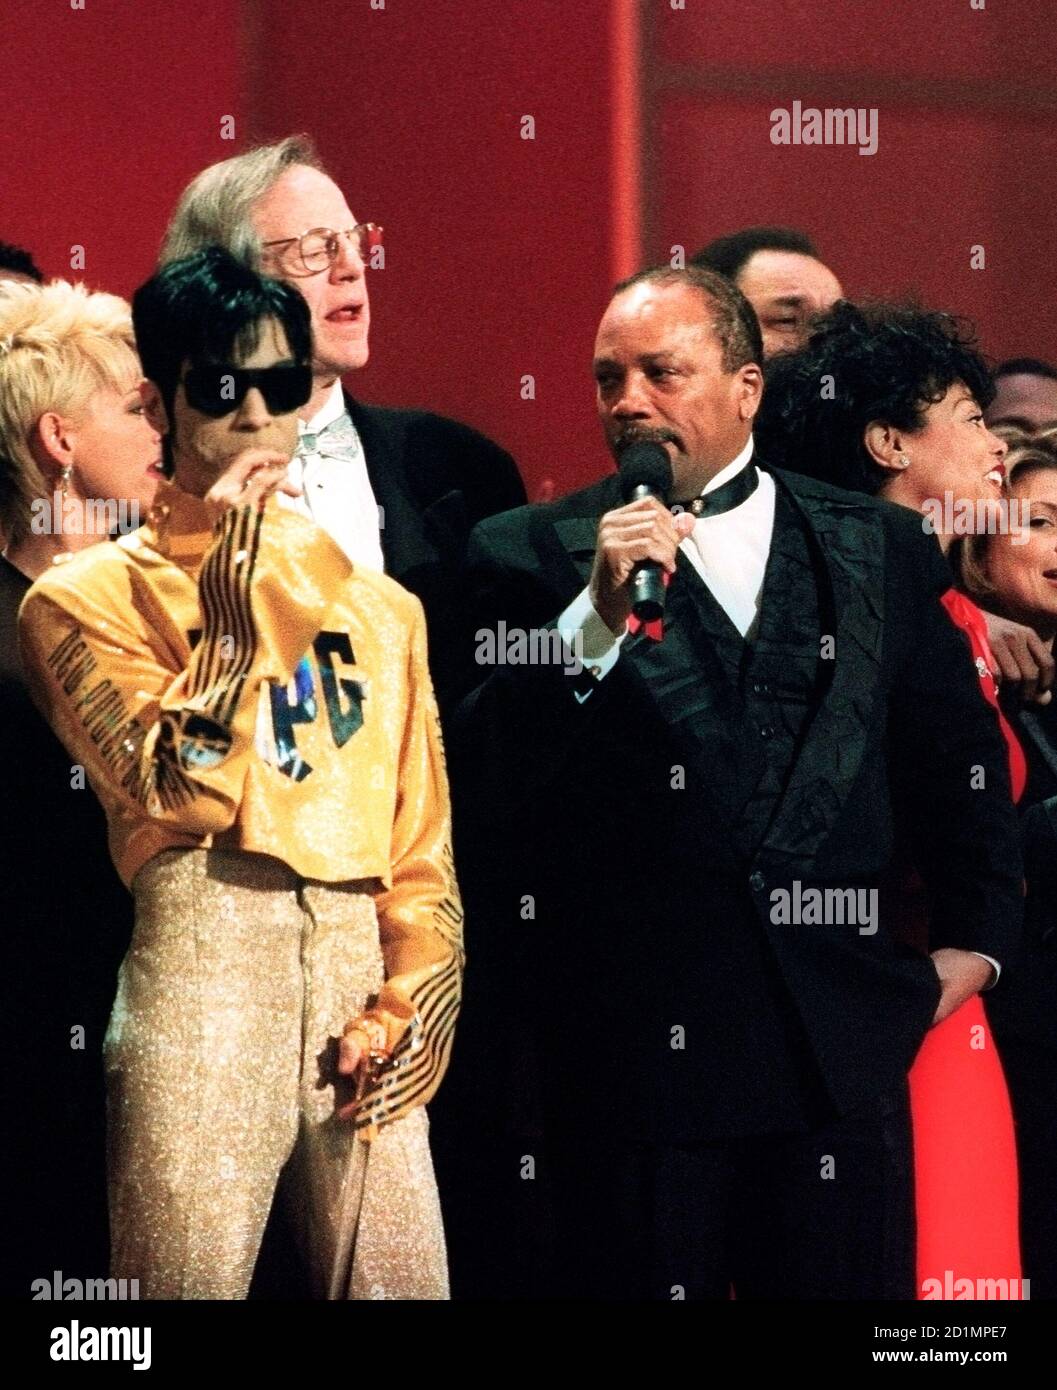 The artist formerly known as Prince (L) sucks on a lolipop as Quincy Jones and others sing 'We Are the World' January 30, 1995 at the American Music Awards.  It was the 10th anniversary of the recording of the song, which raised money for African famine relief.  Prince, who has not revealed his new name, was presented the Award of Merit.  REUTERS/Lee Celano (UNITED STATES)  BEST QUALITY AVAILABLE Stock Photo